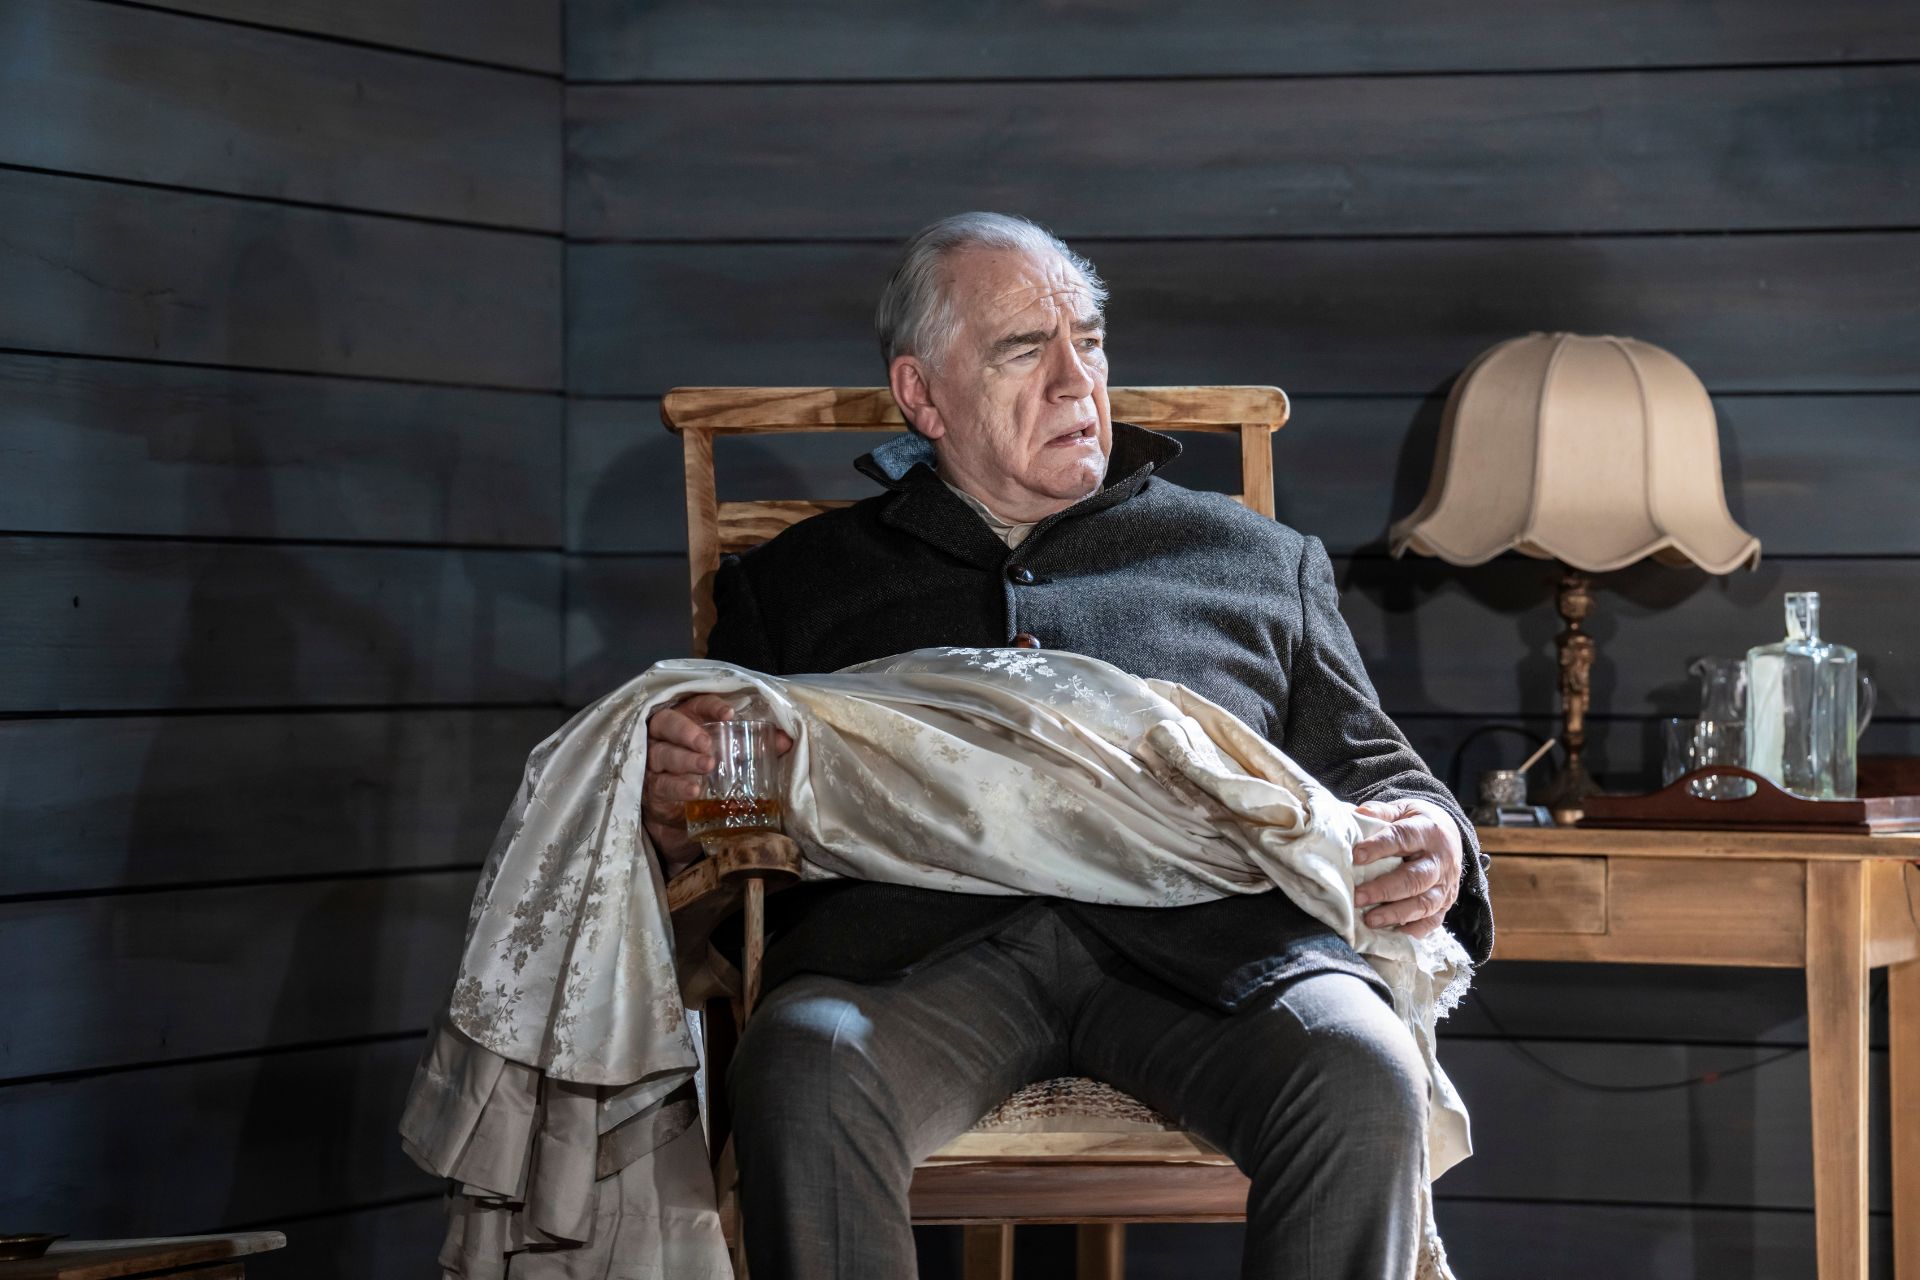 'It Stays With You After The Curtain Goes Down': Long Day's Journey Into Night Review